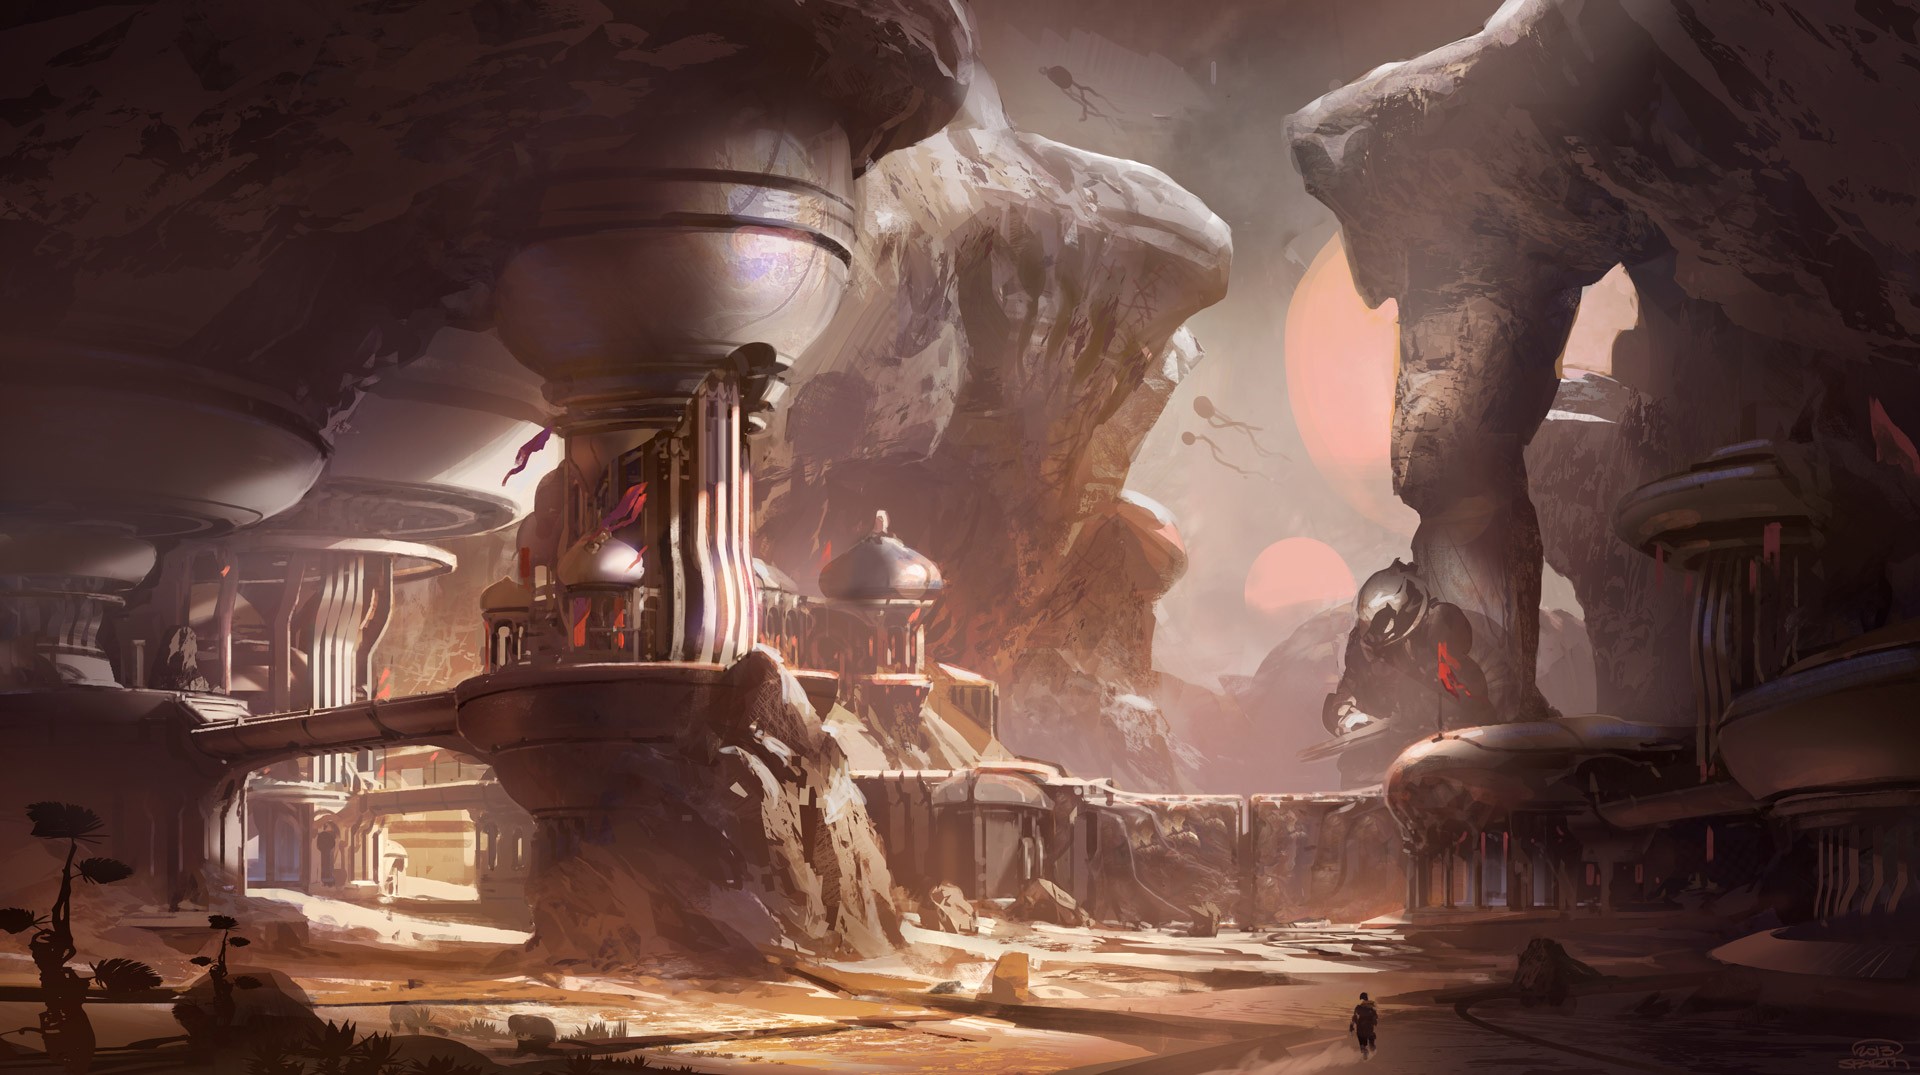 Halo-4-Guardians-Gets-Concept-Art-More-Details-from-Frank-O-Connor-442577-2.jpg